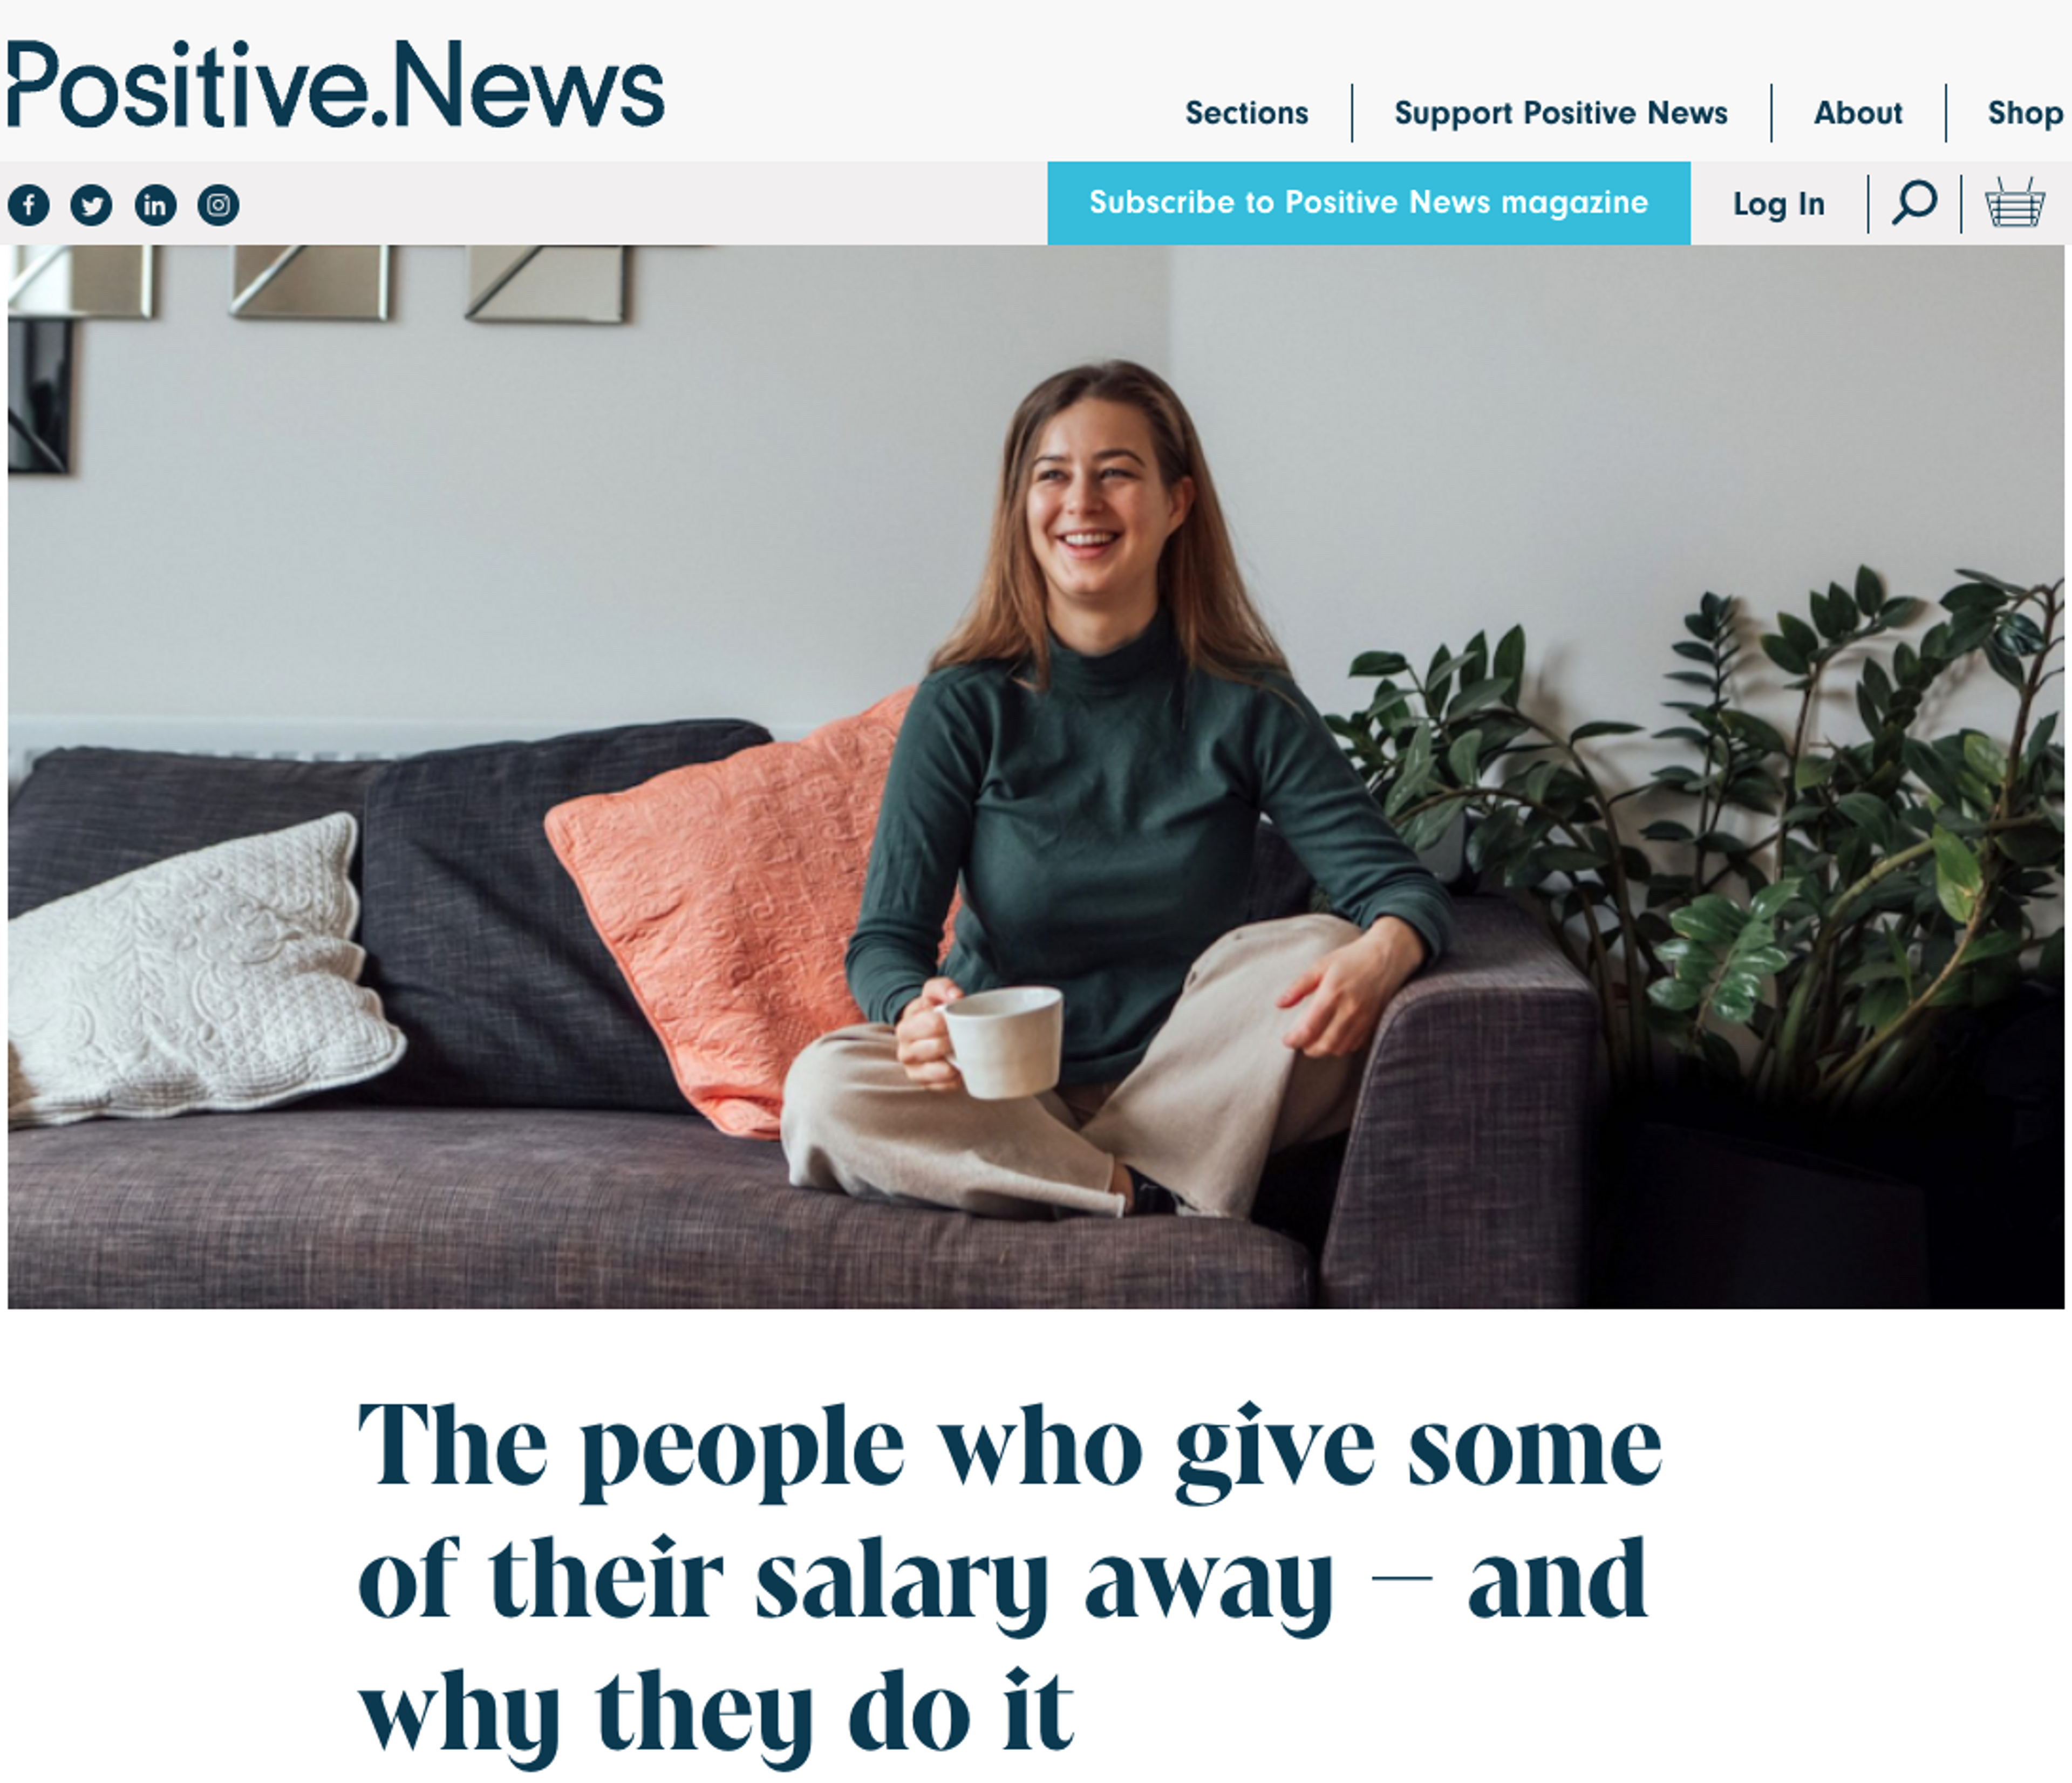 a screenshot of an article called "the people who give some of their salary away' - and why they do it